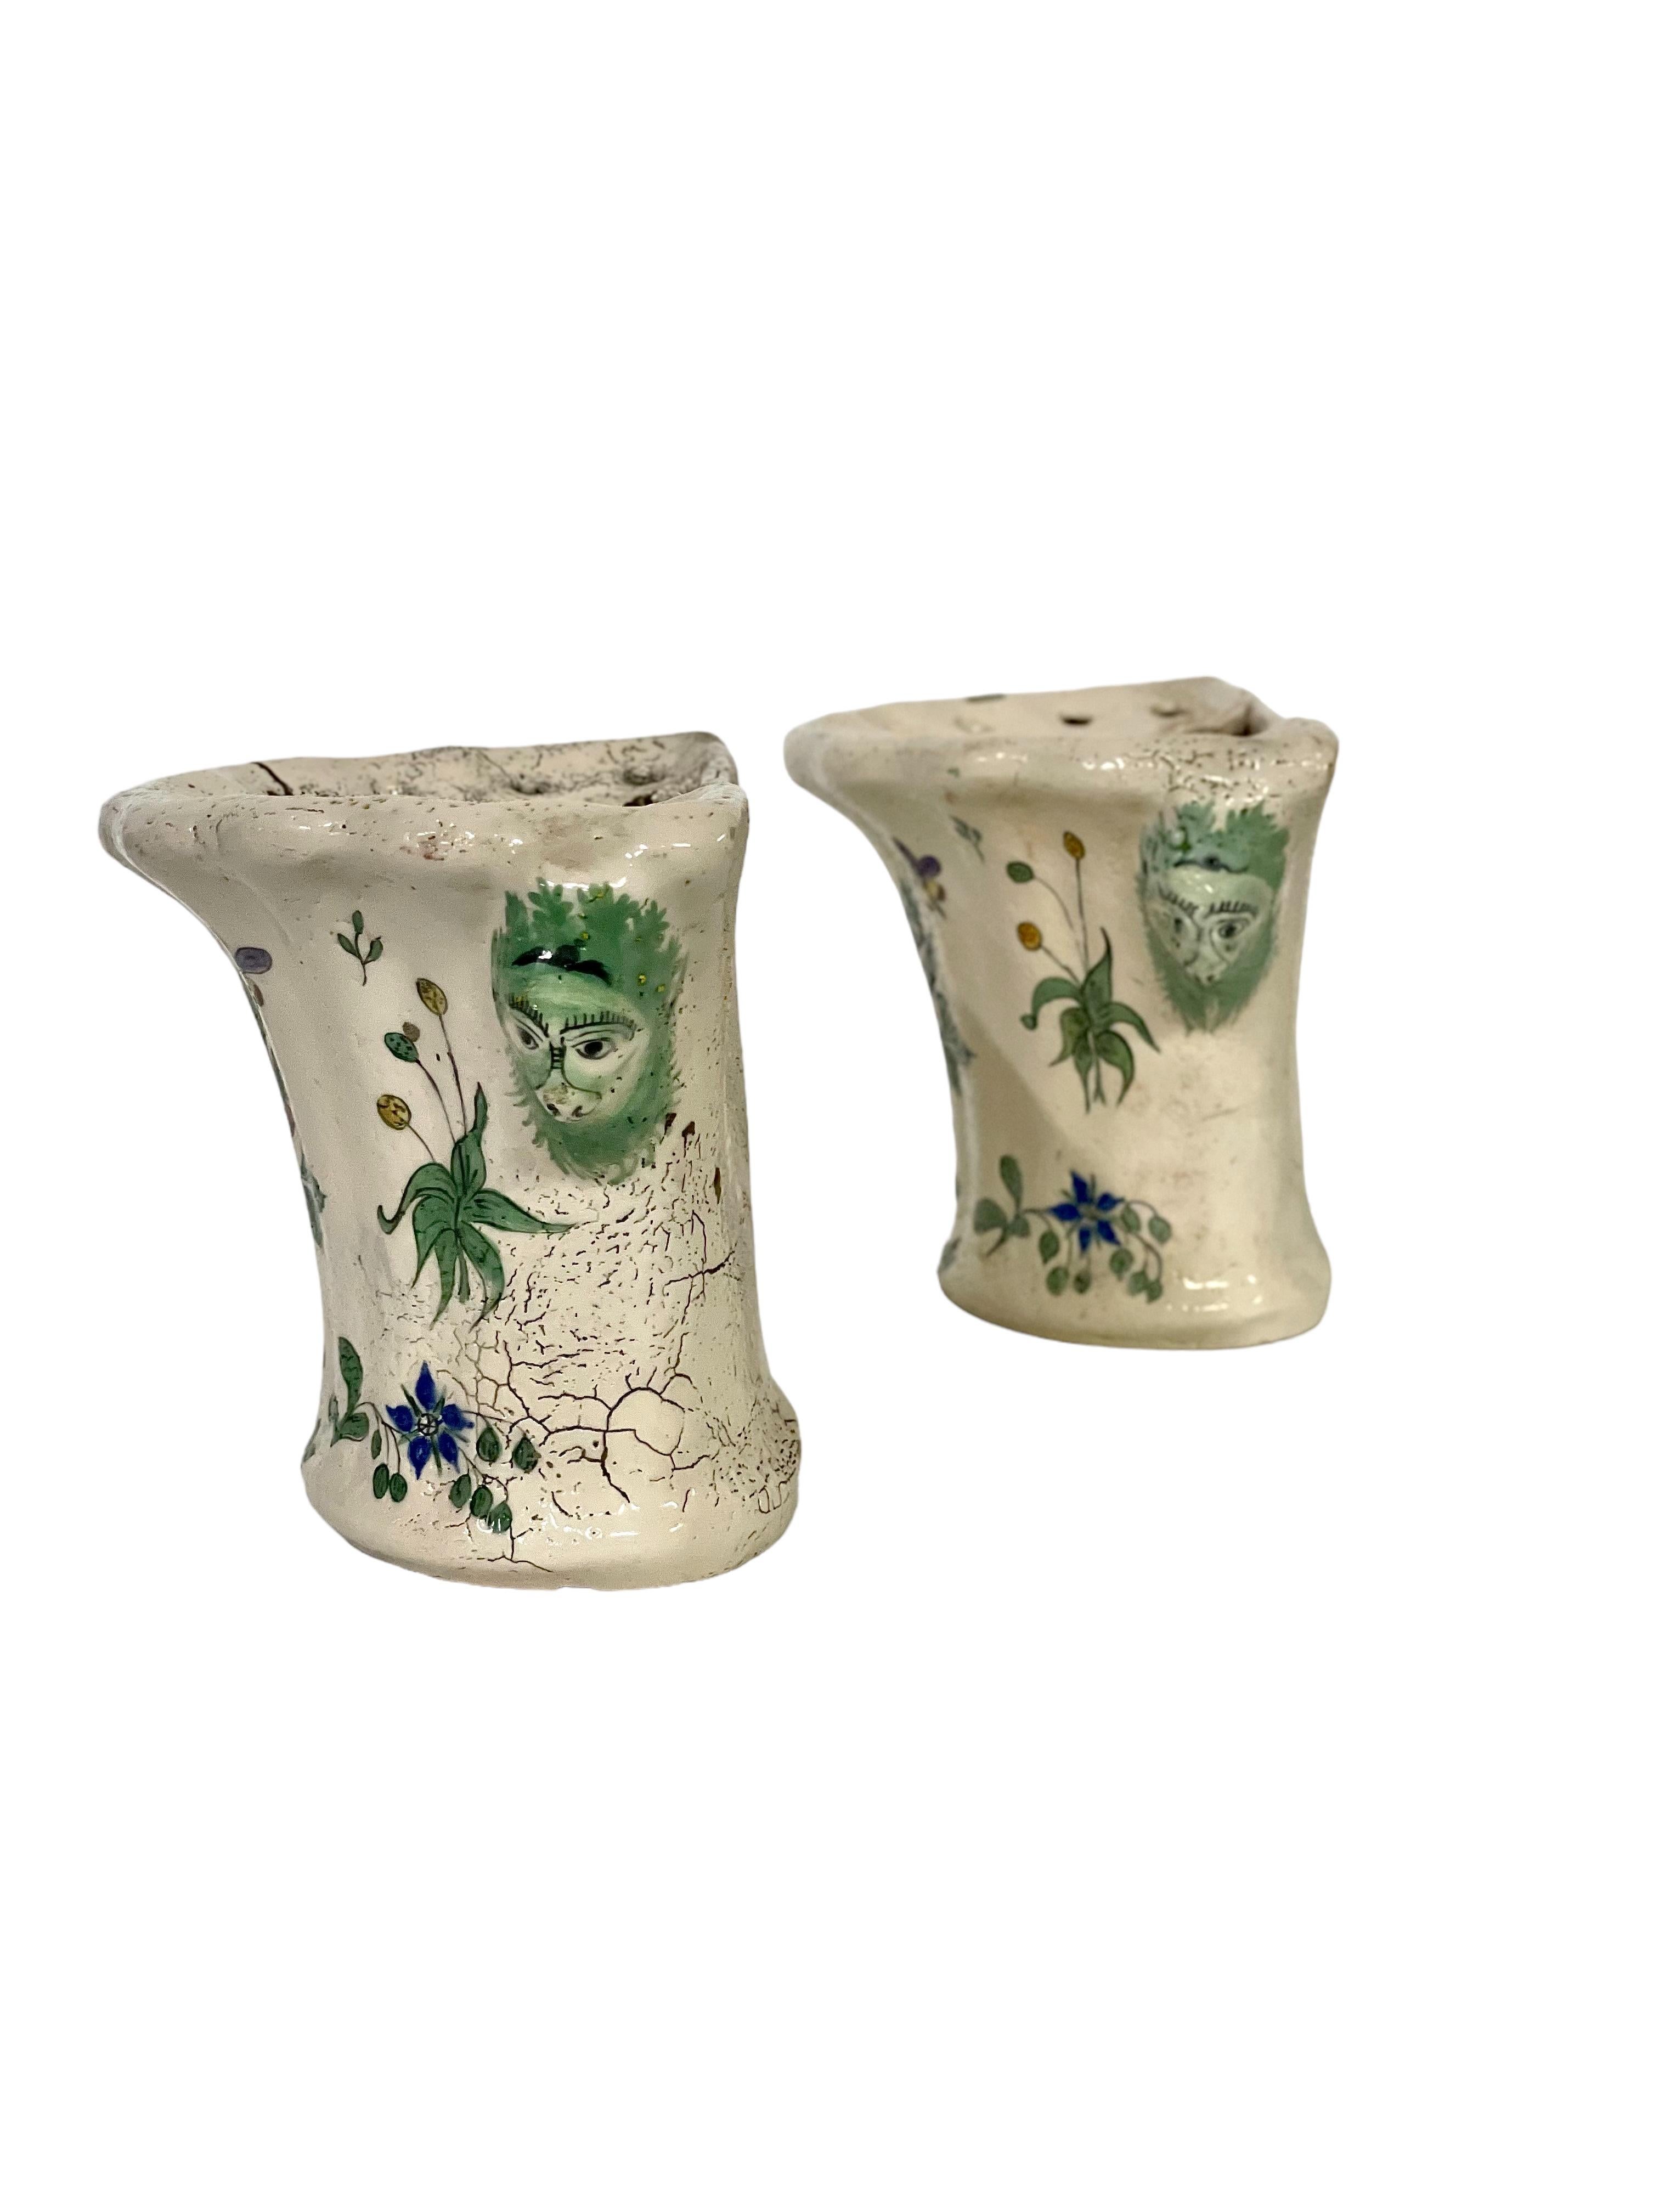 French Pair of 18th Century Terracotta 'Bouquetières', or Flower Vases For Sale